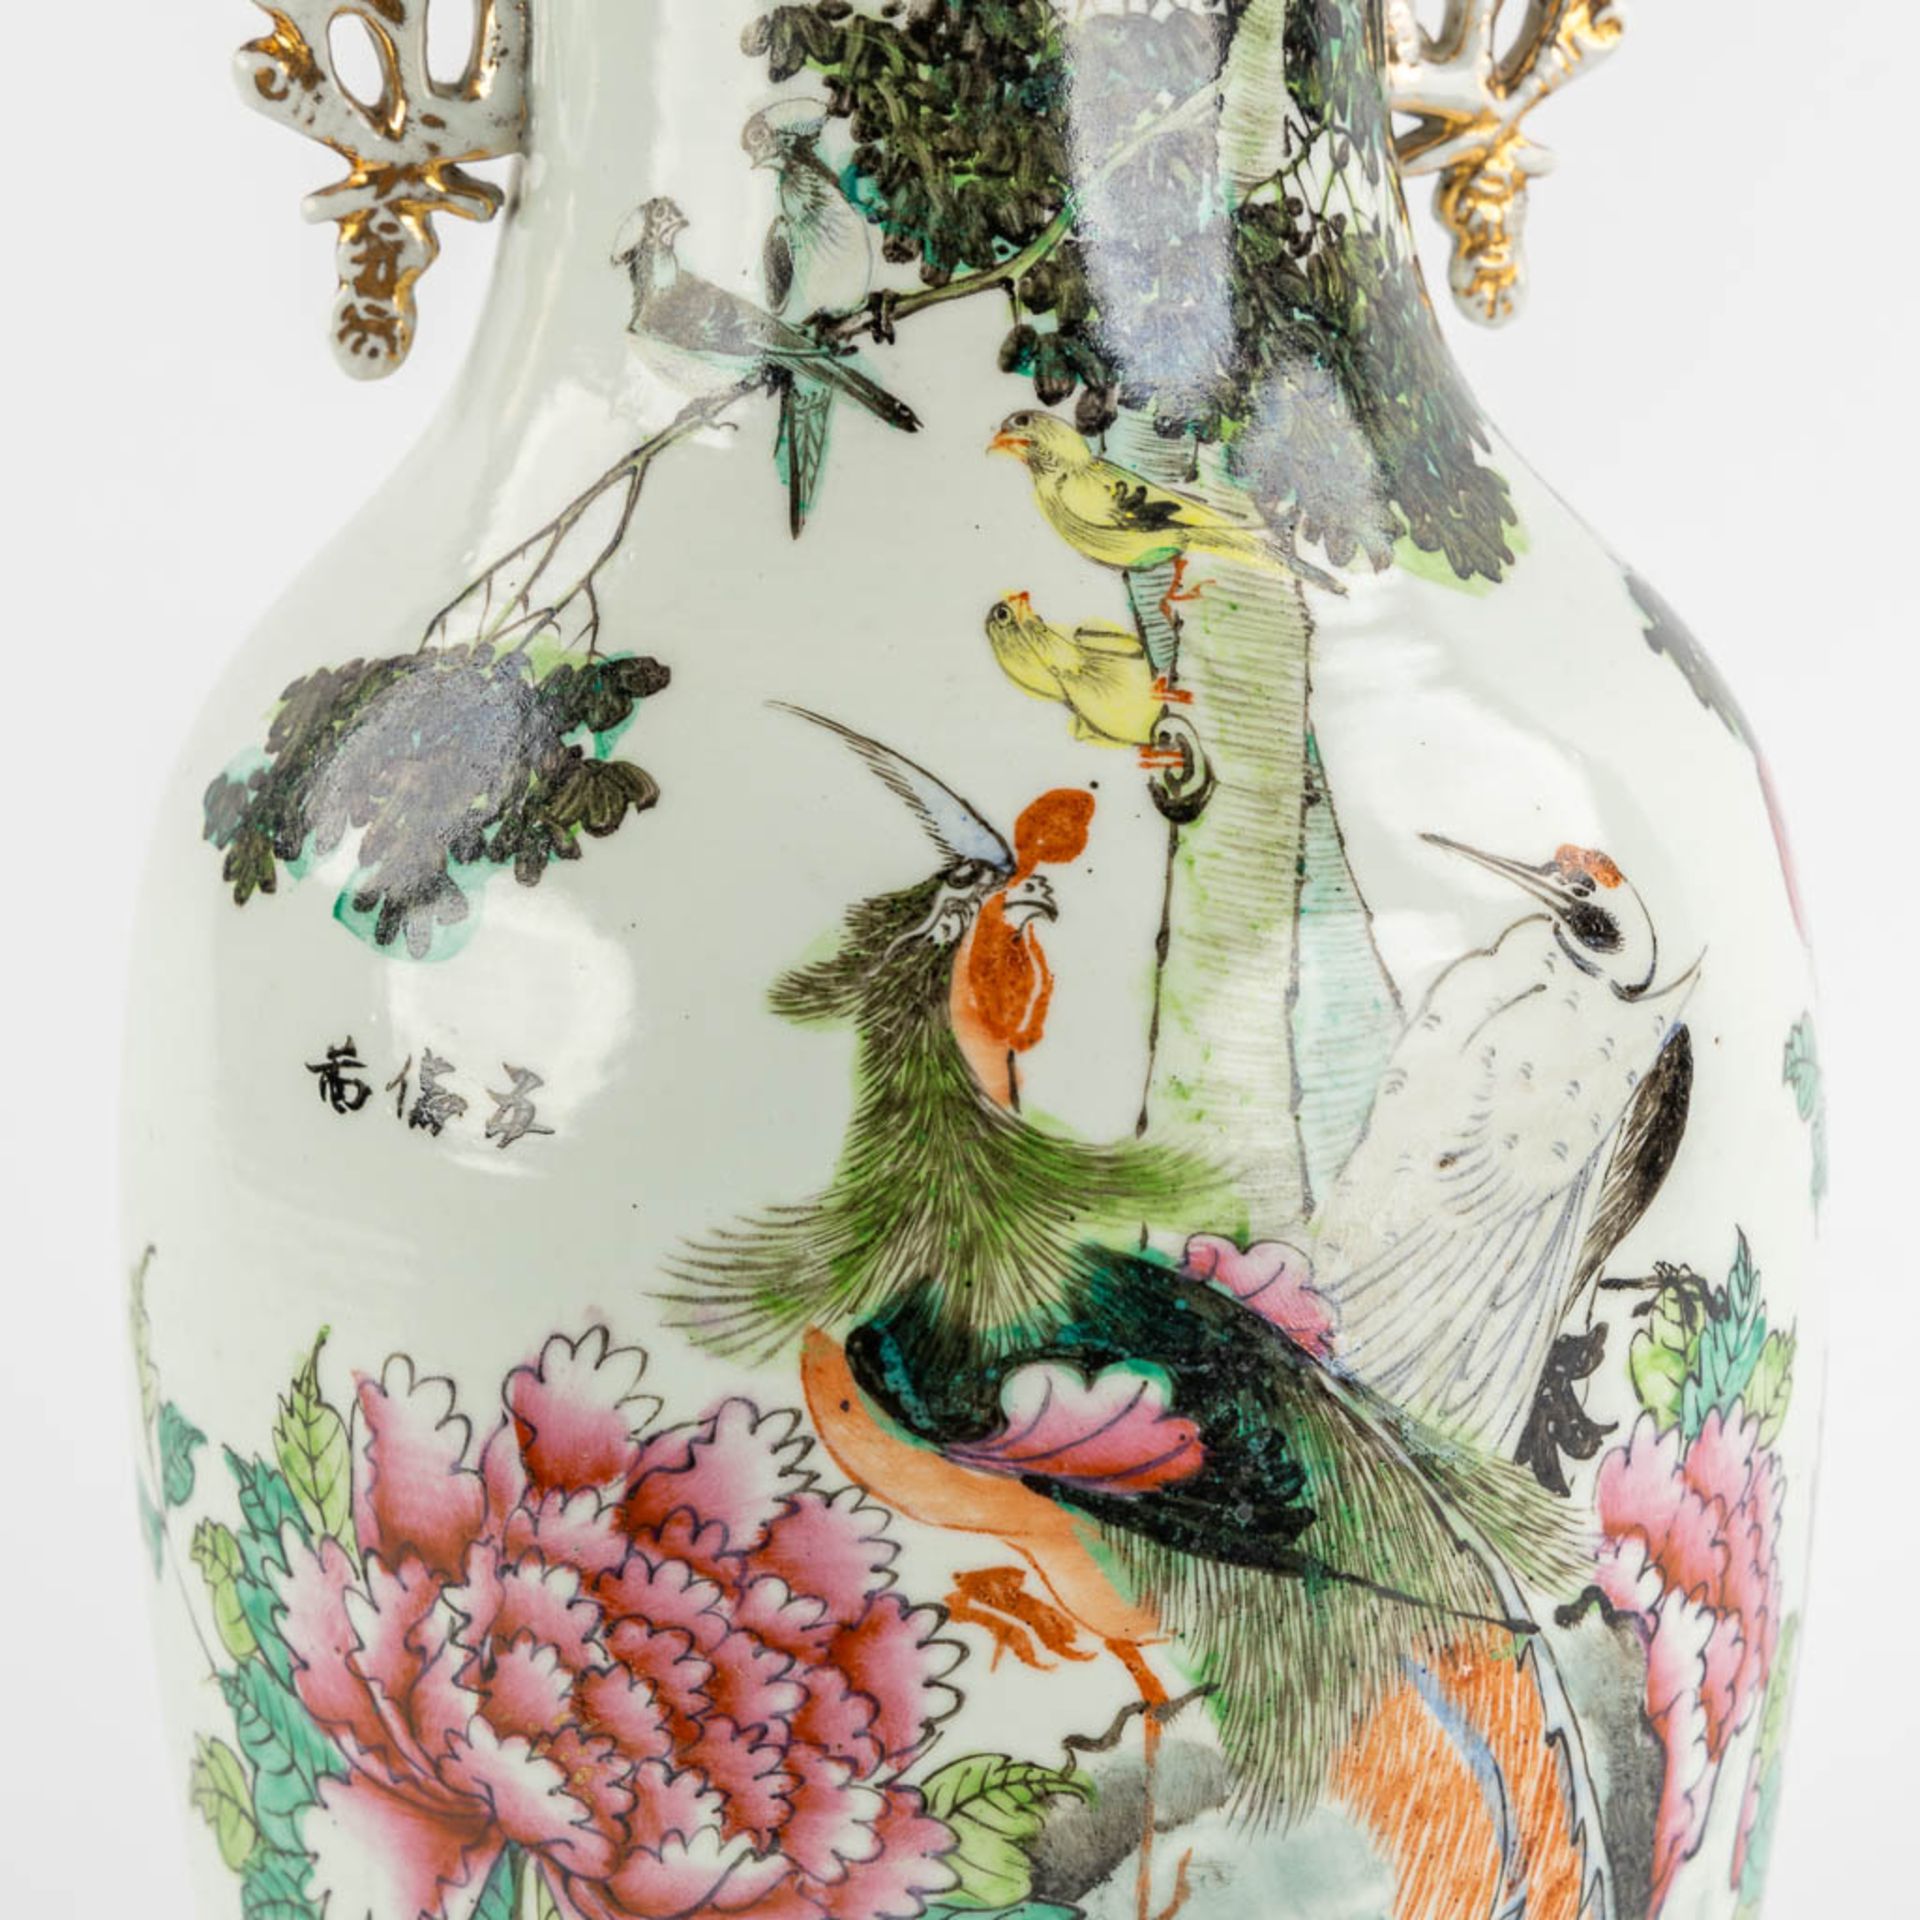 Two Chinese Famille Rose vases decorated with figurines. 19th/20th C. (H:58 x D:23 cm) - Image 13 of 15